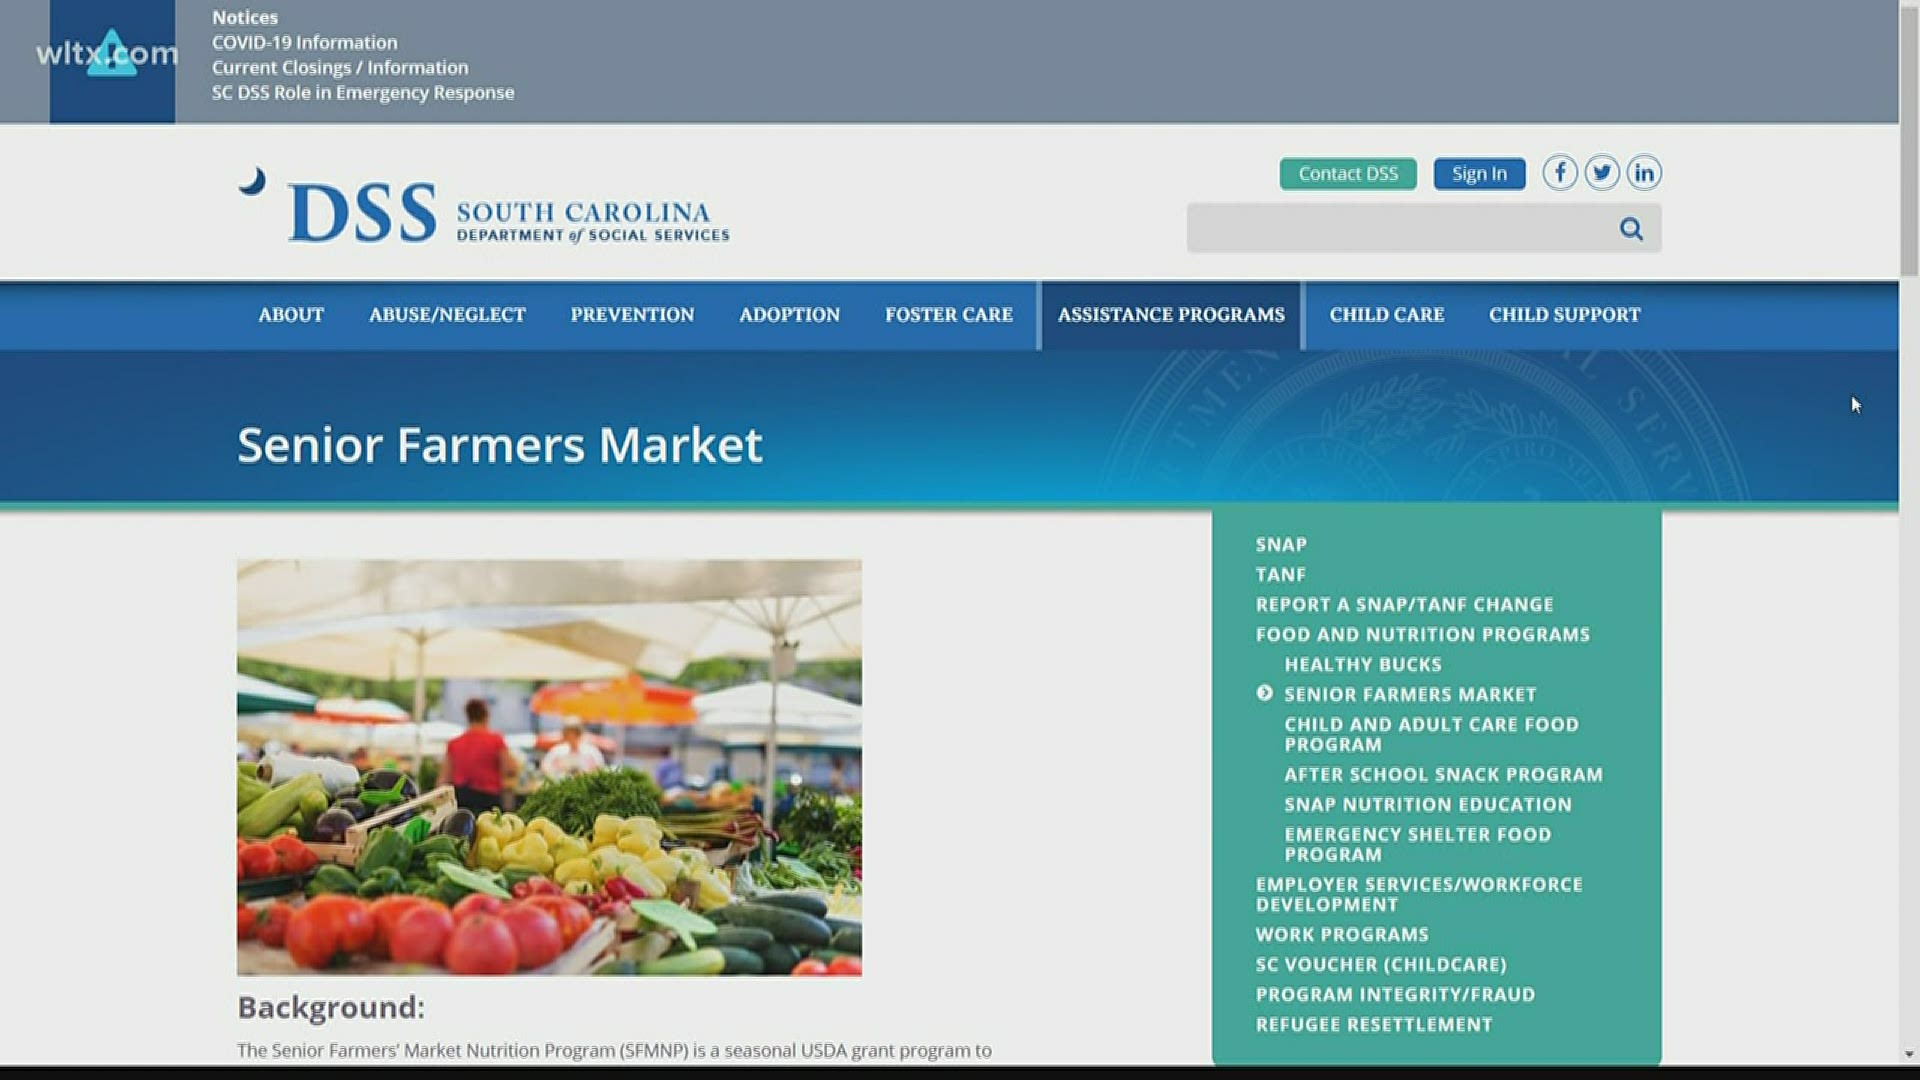 Farmers market food vouchers are now available to lower income senior citizens.